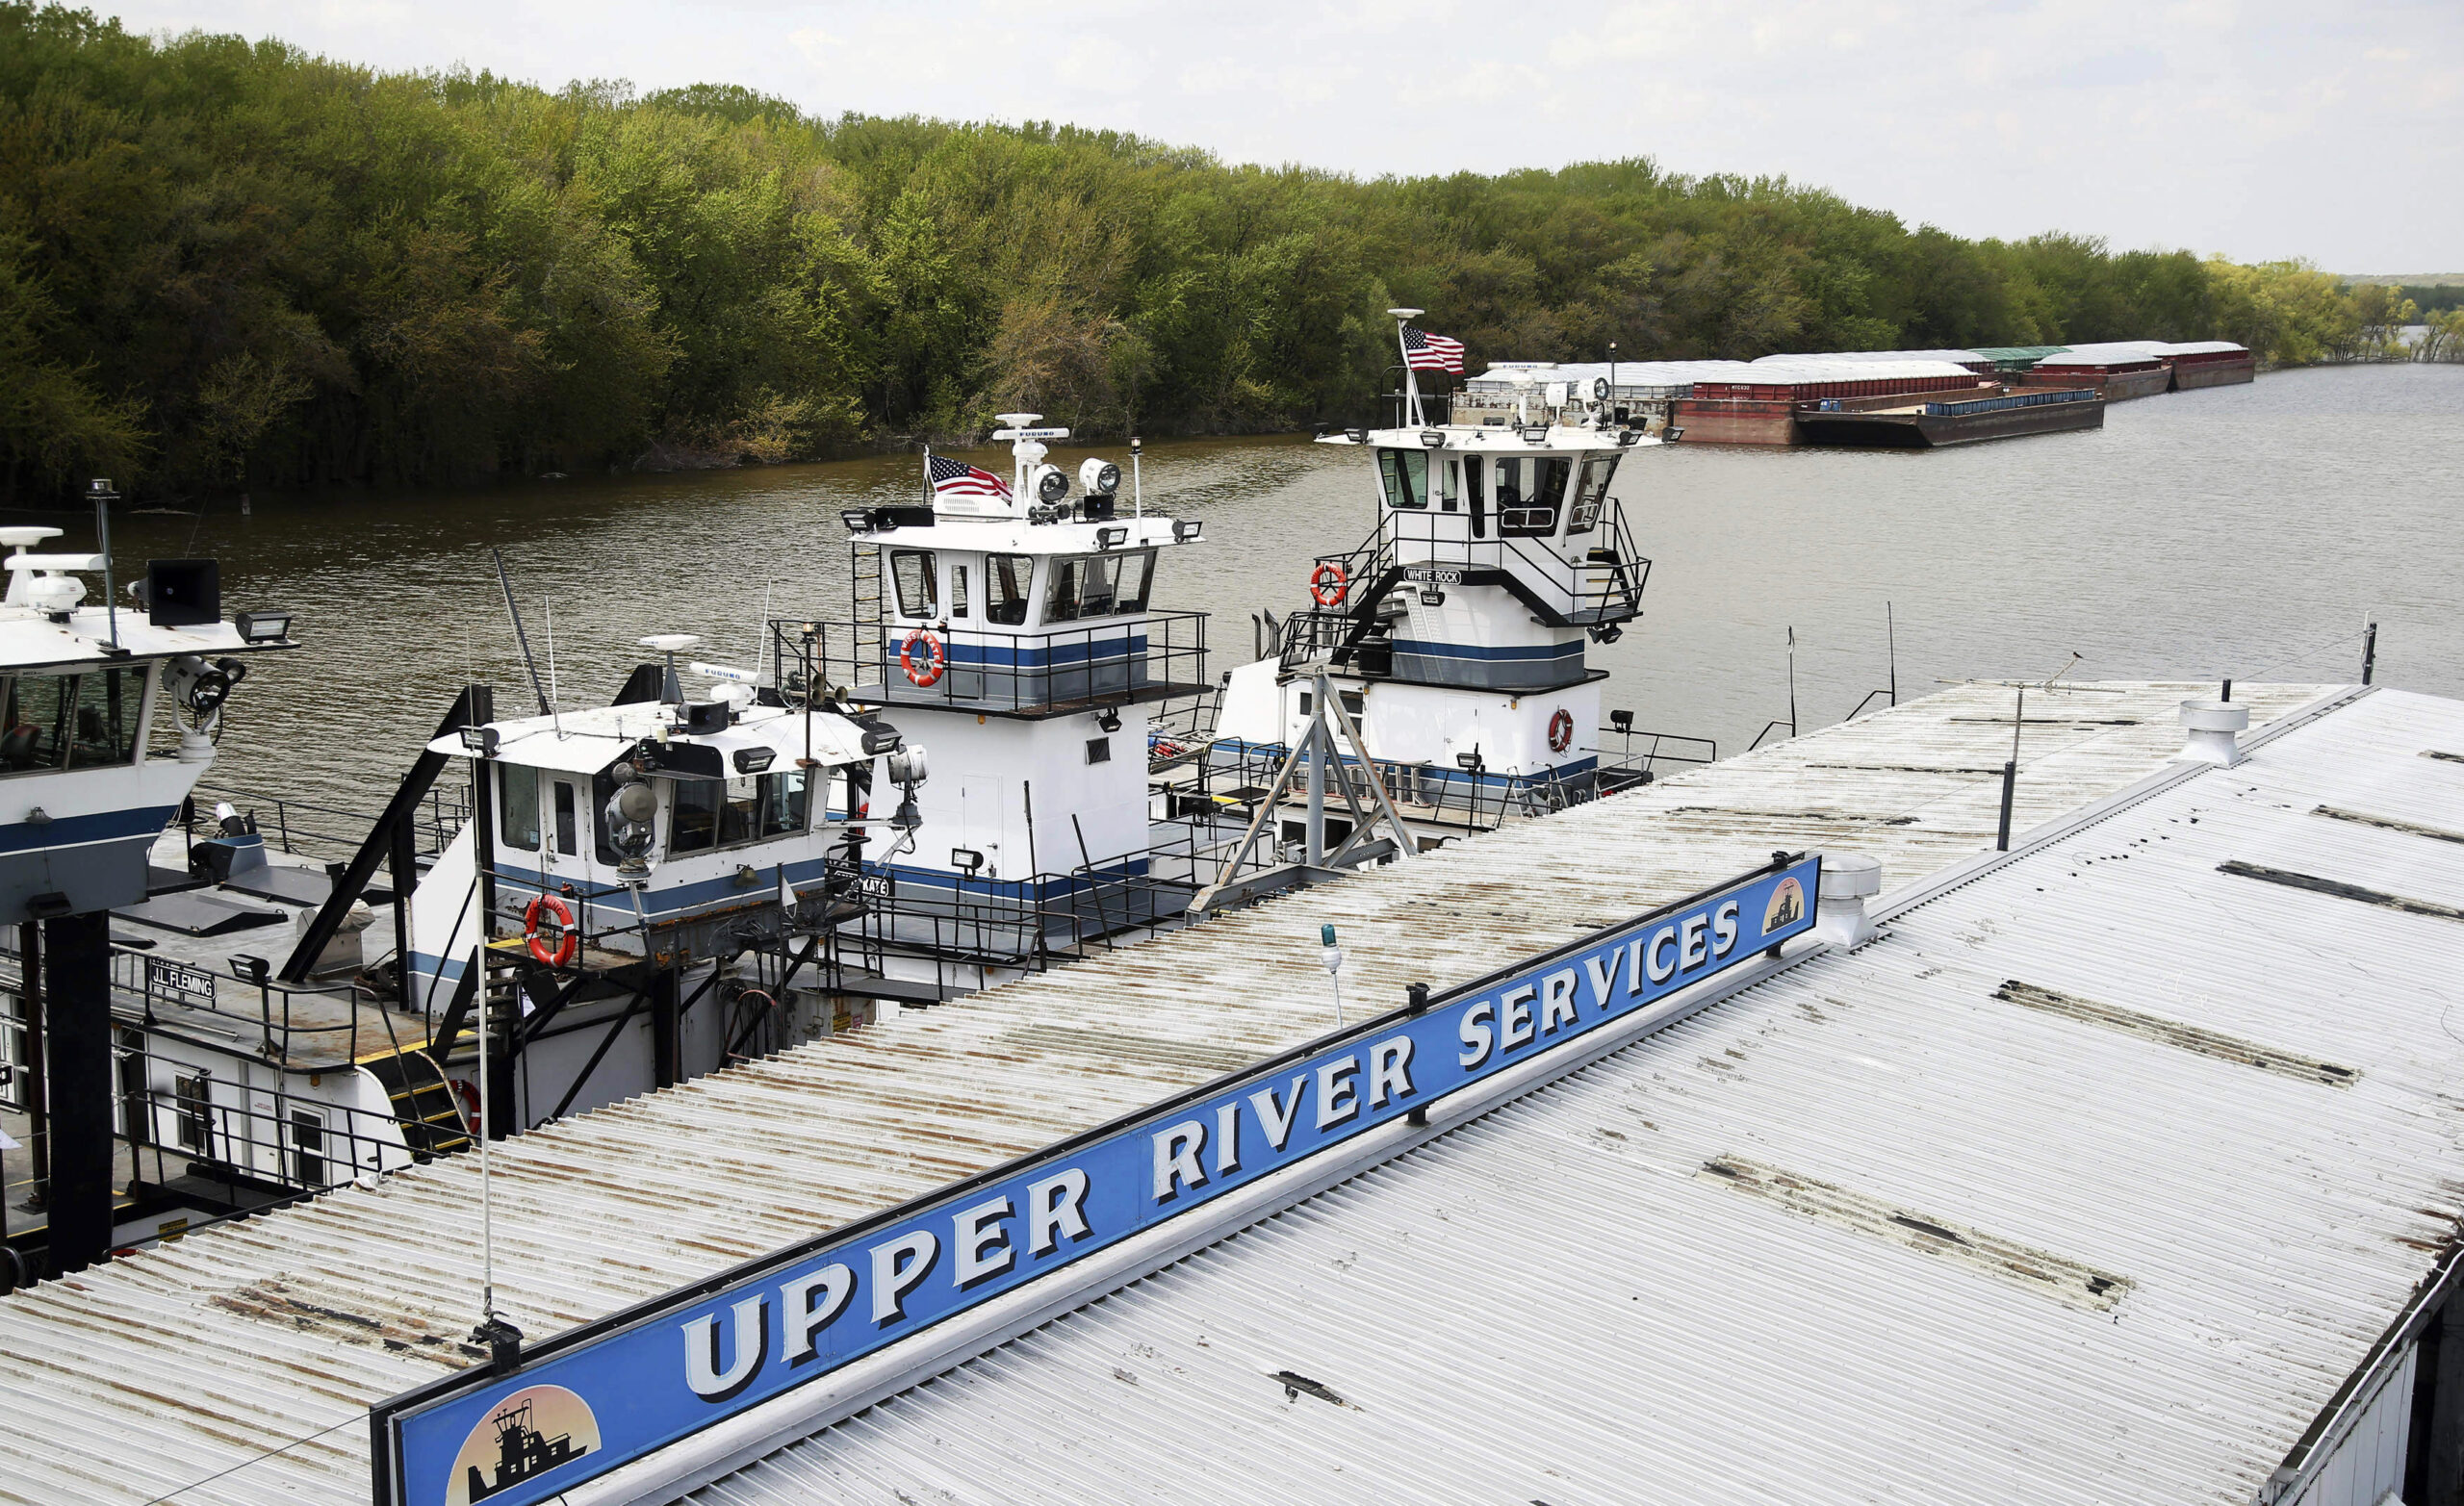 In this Tuesday, May 14, 2019 photo, empty barges, background right, are moored at the Upper River Services along with tug boats on the Mississippi River in St. Paul, Minn., as spring flooding interrupts shipments on the river. Historic Midwest flooding t